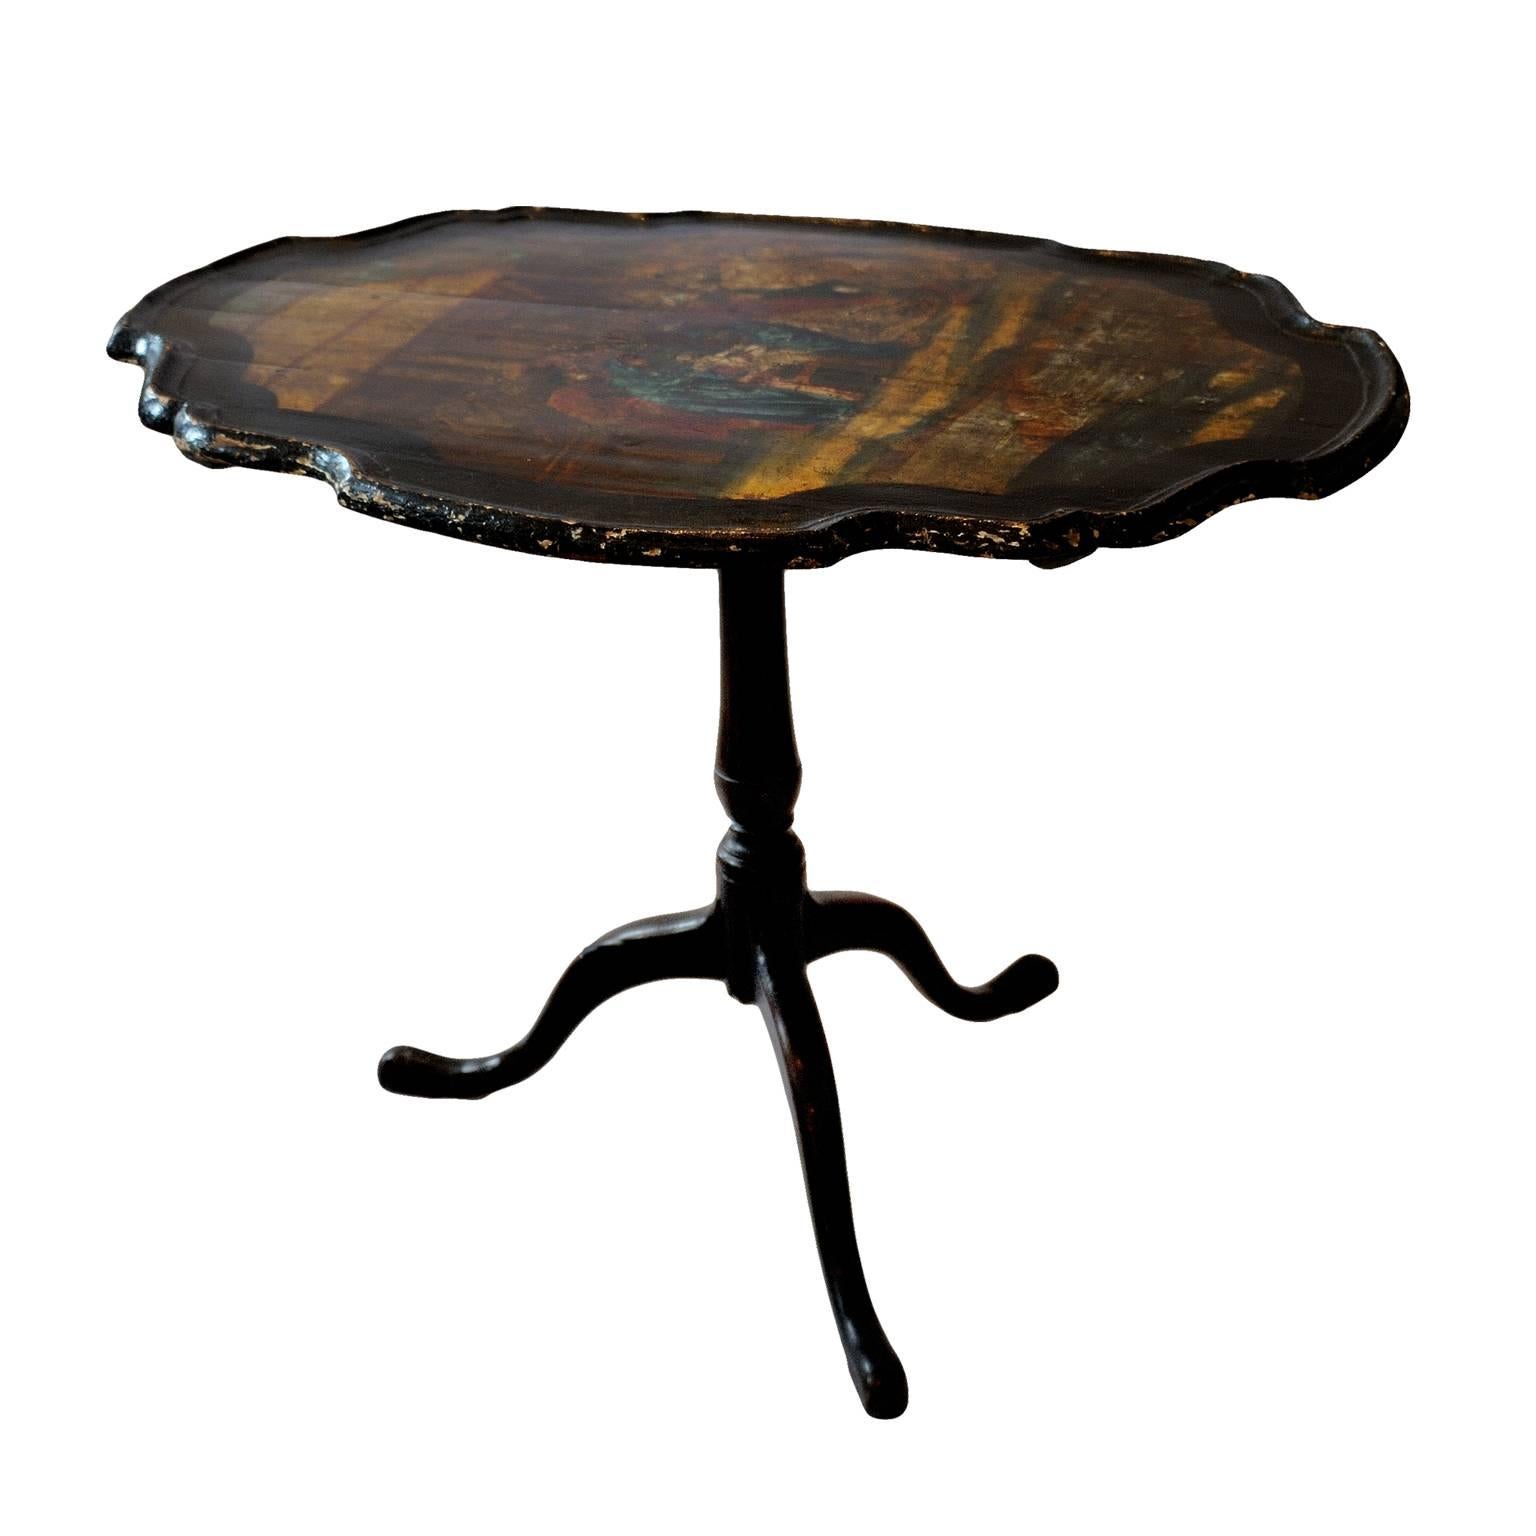 This is a wonderful mid-18th century Dutch painted tripod table, made from pine and oak, features beautiful charismatic period artwork showing the 